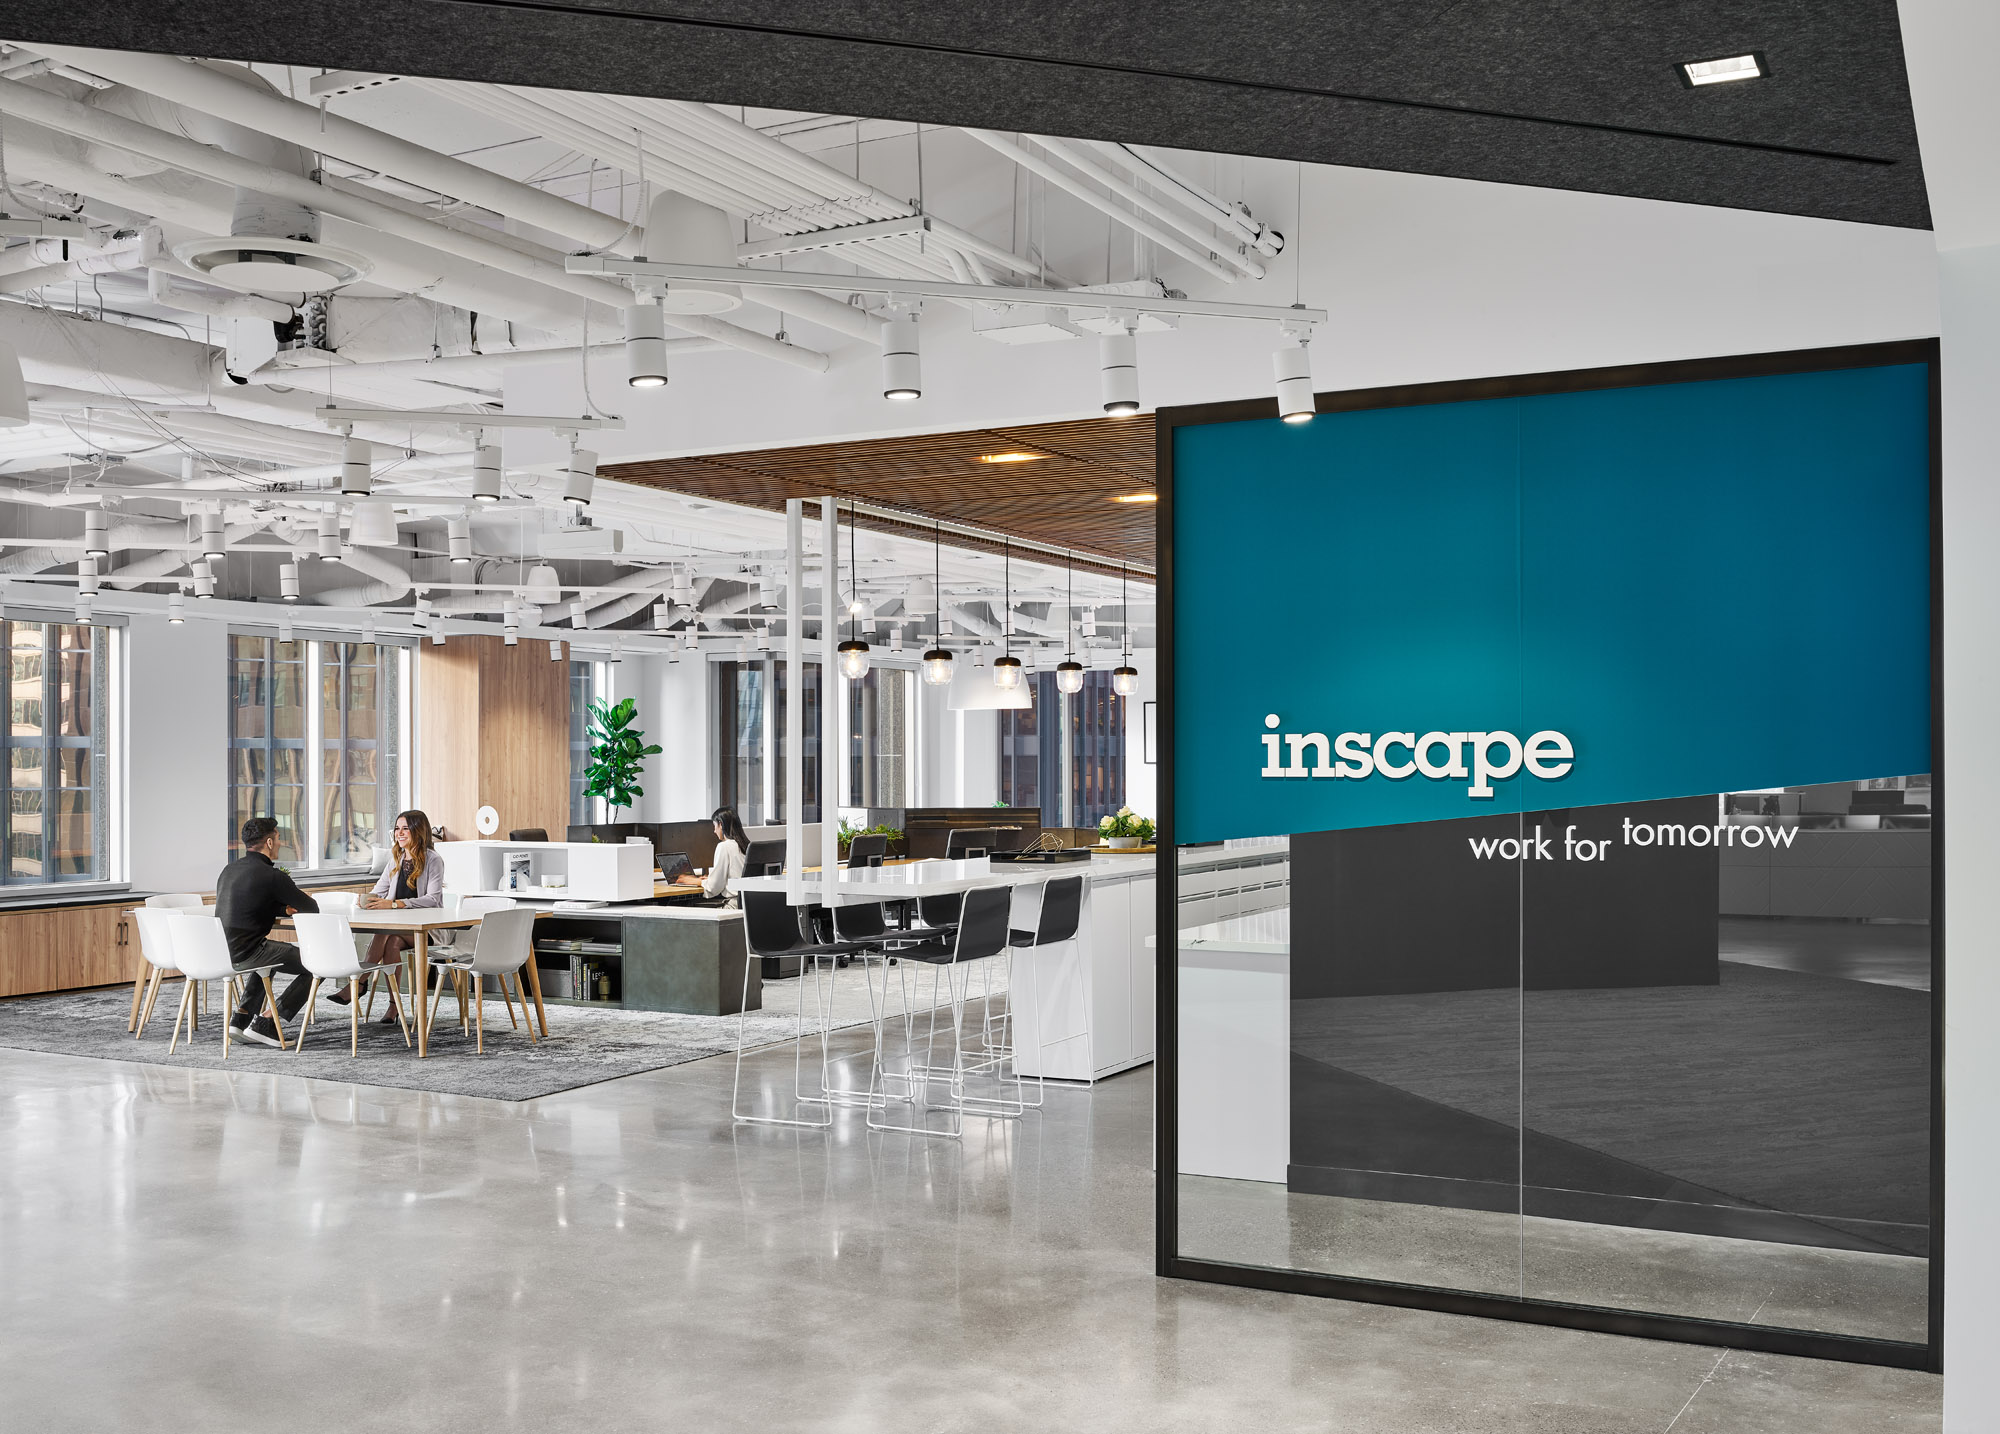 Inscape showroom entrance with glass wall featuring logo